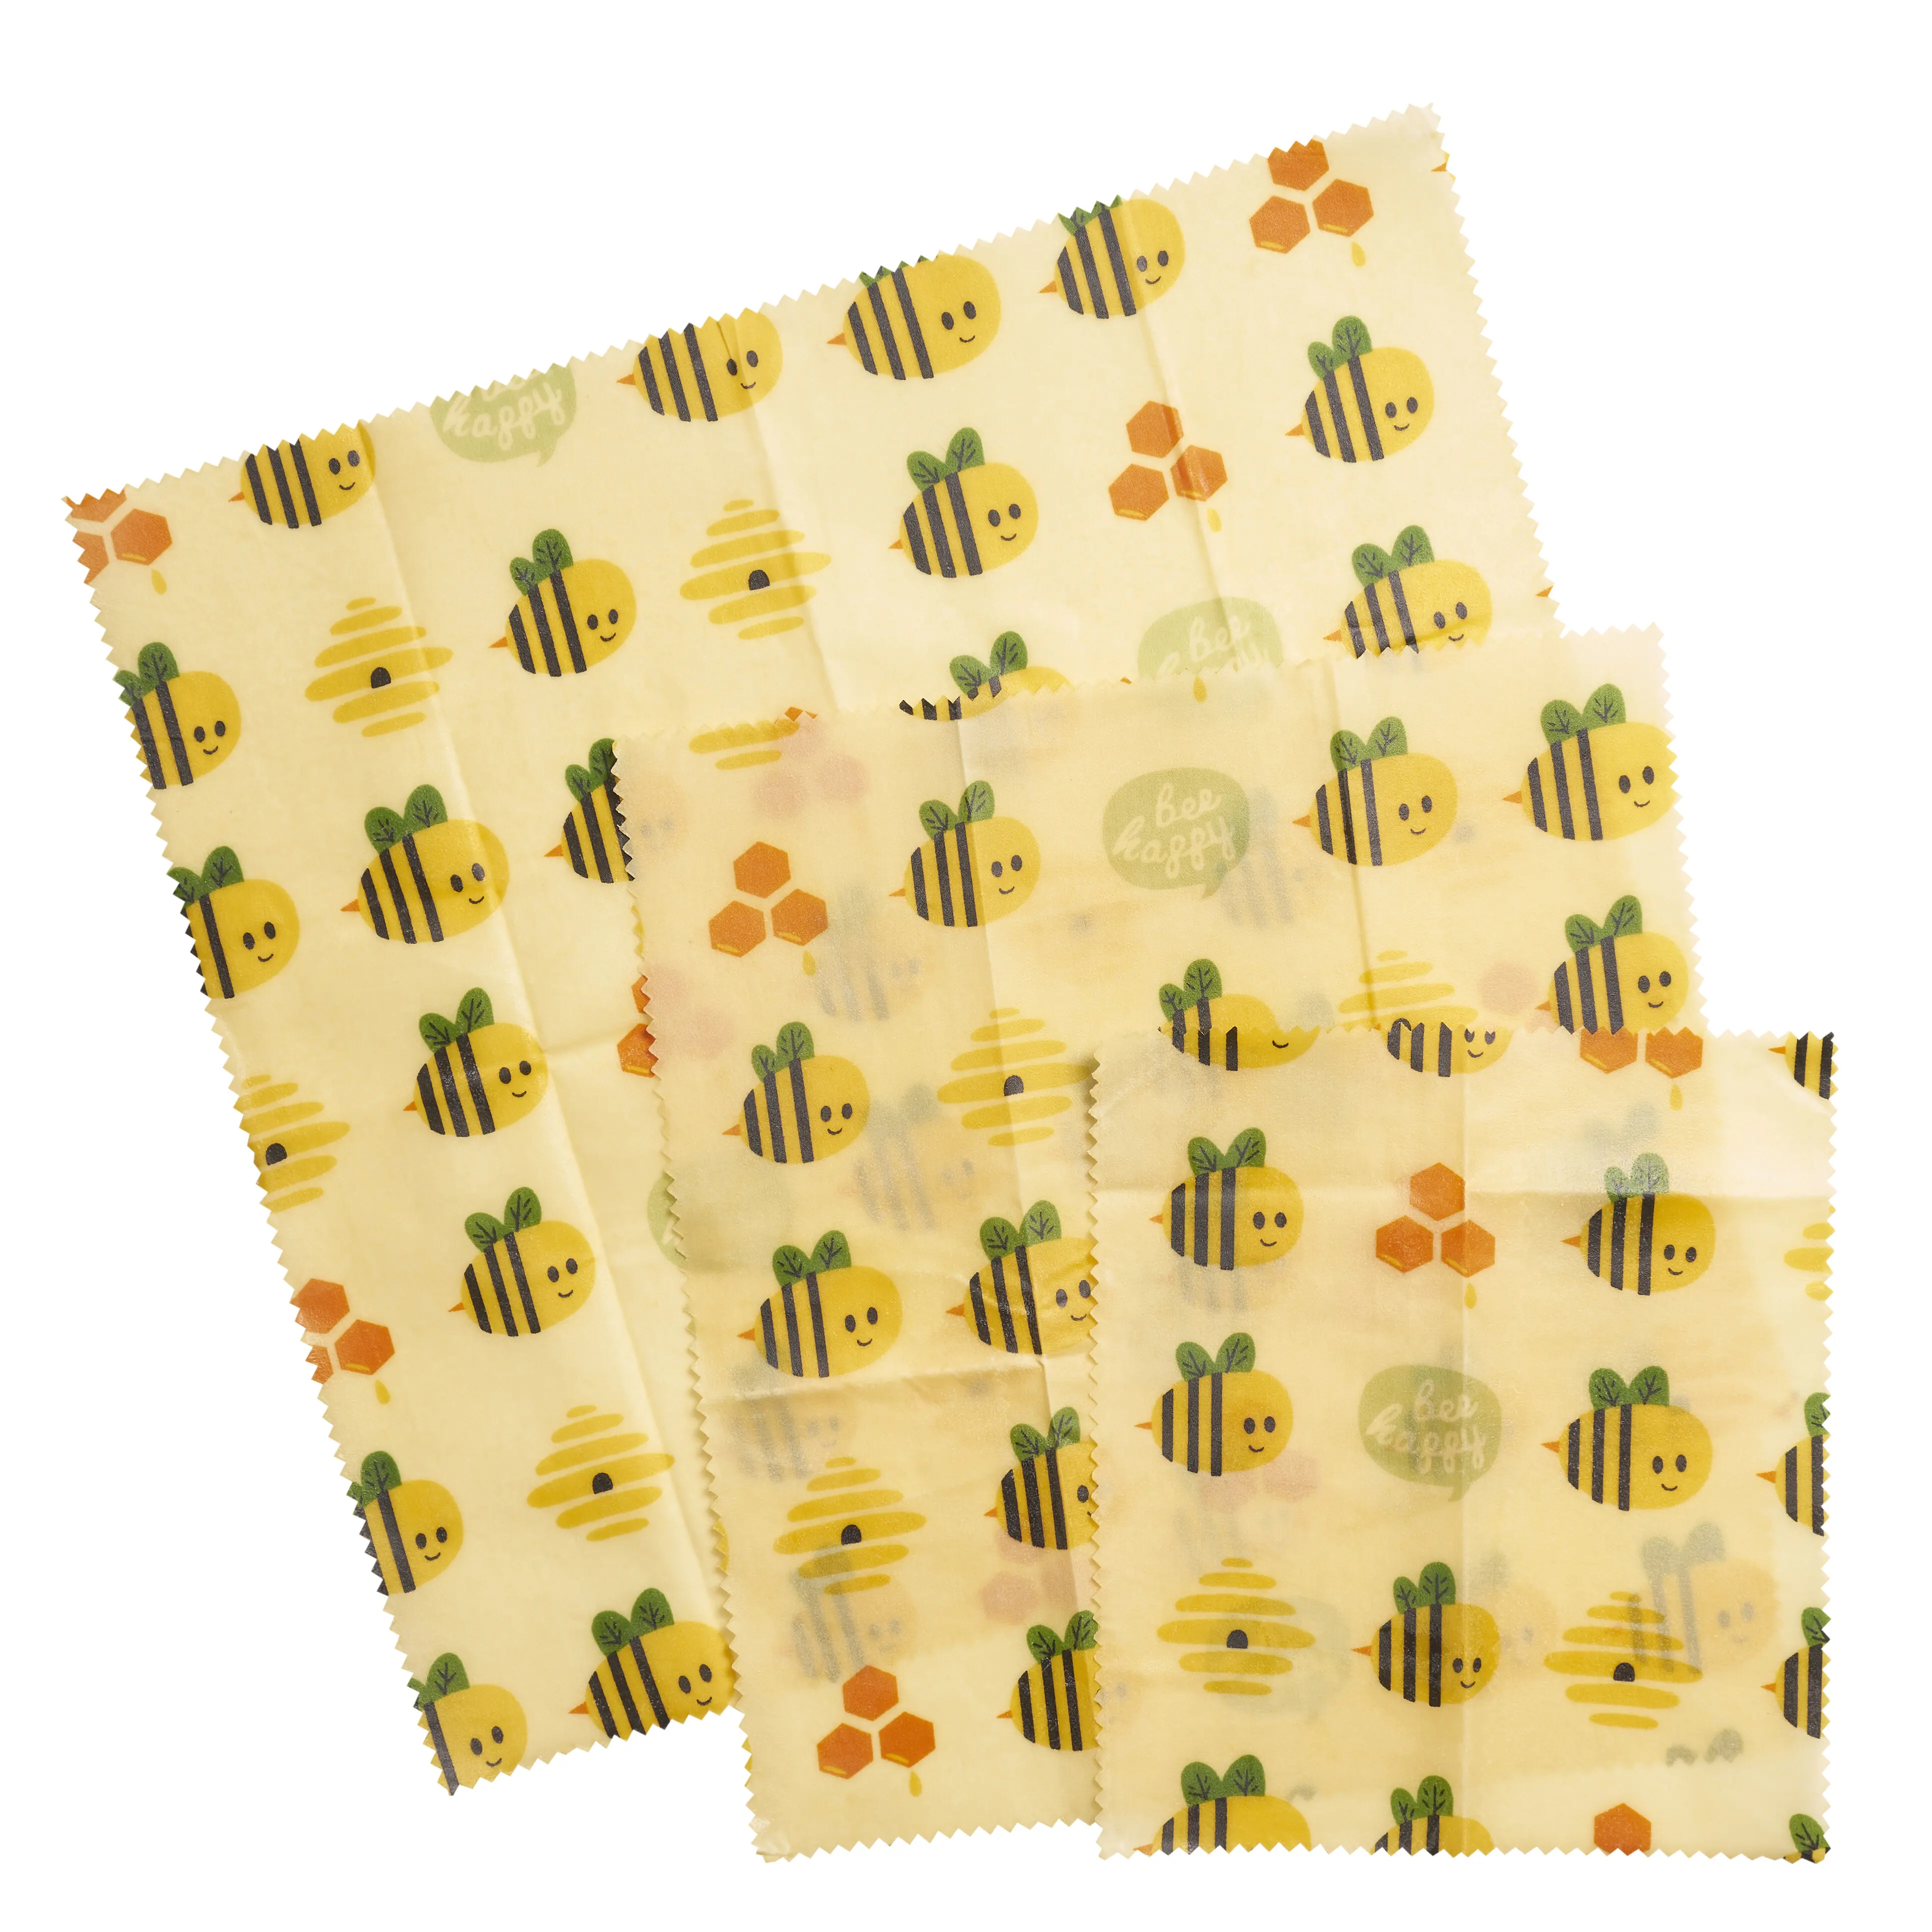 Reusable 100% organic cotton Beeswax Food Wrap, Plastic-free alternatives for food storage